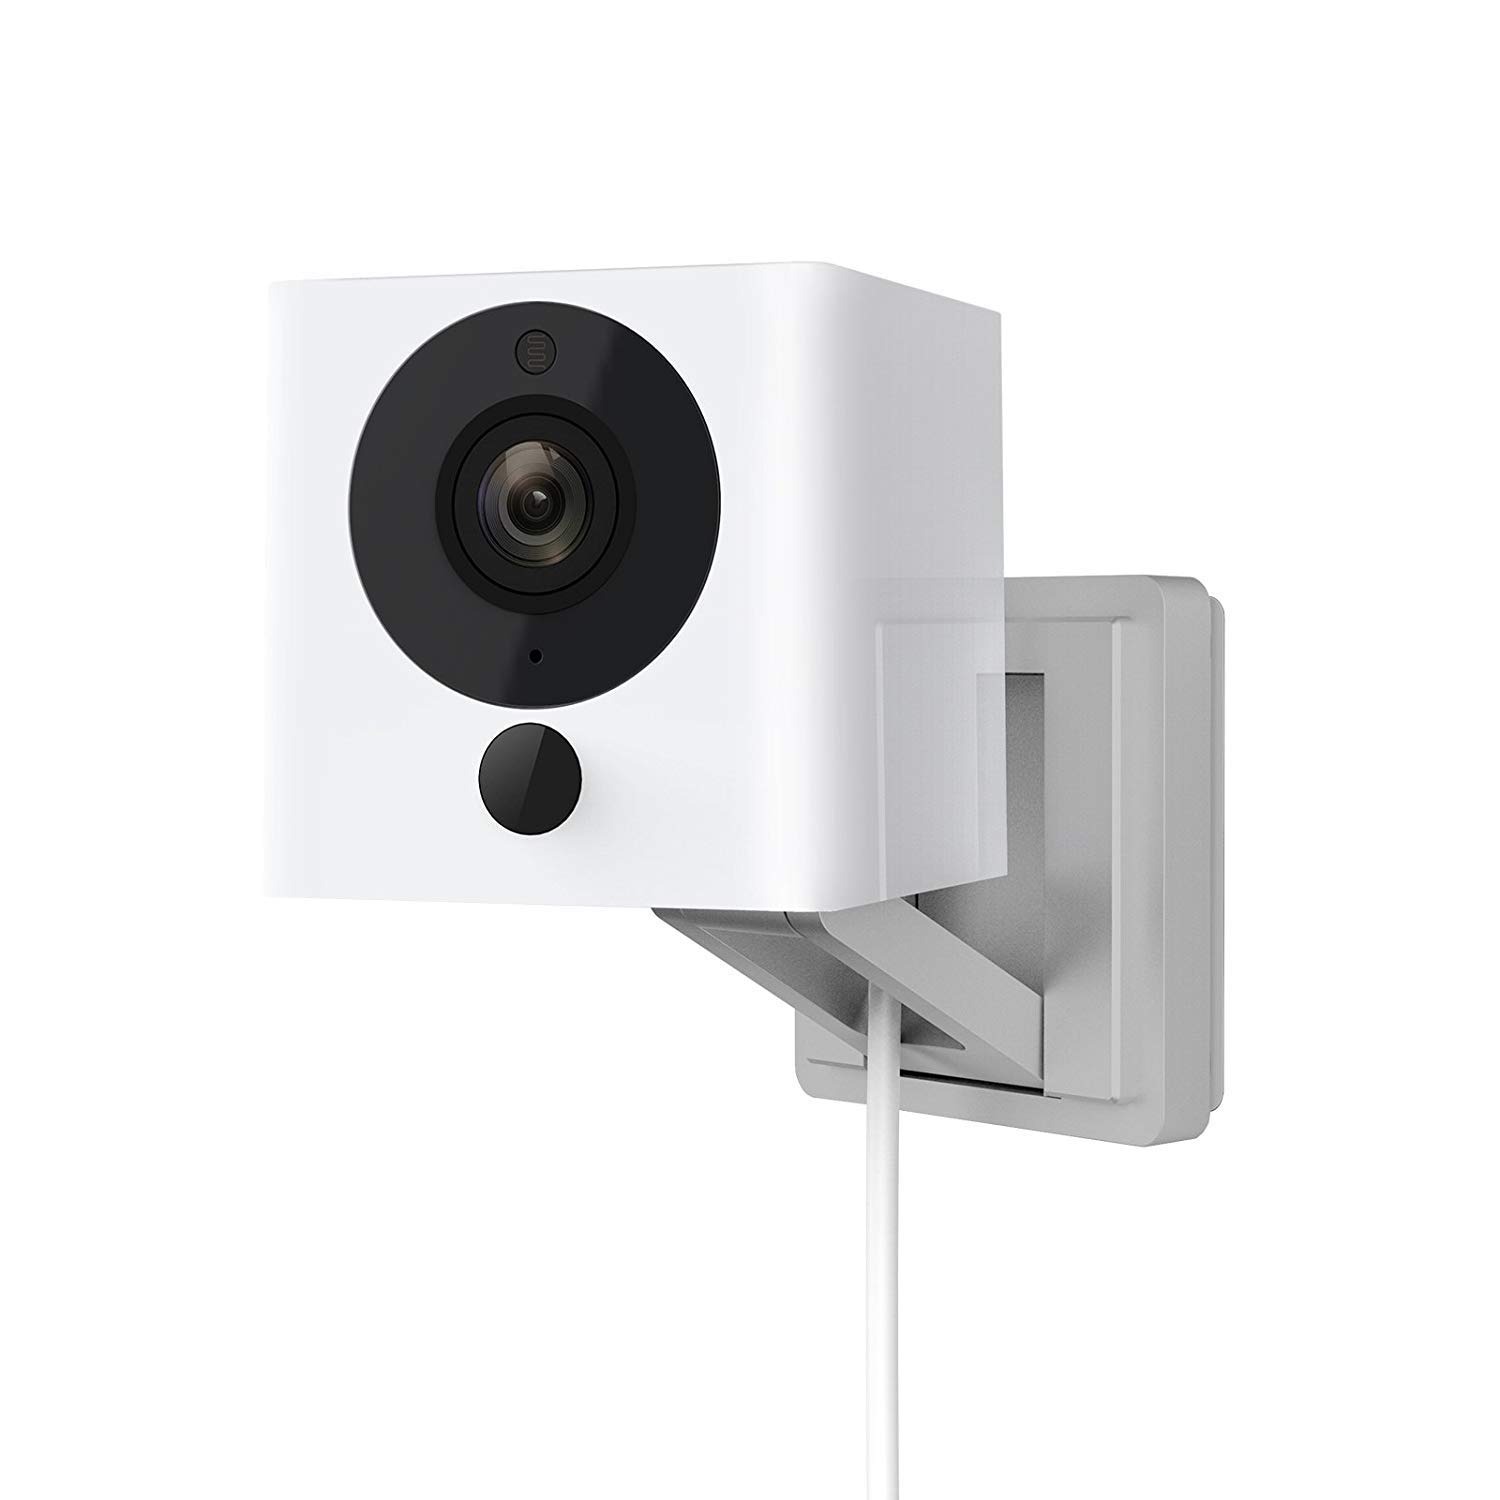 Wyze Cam wall mounted